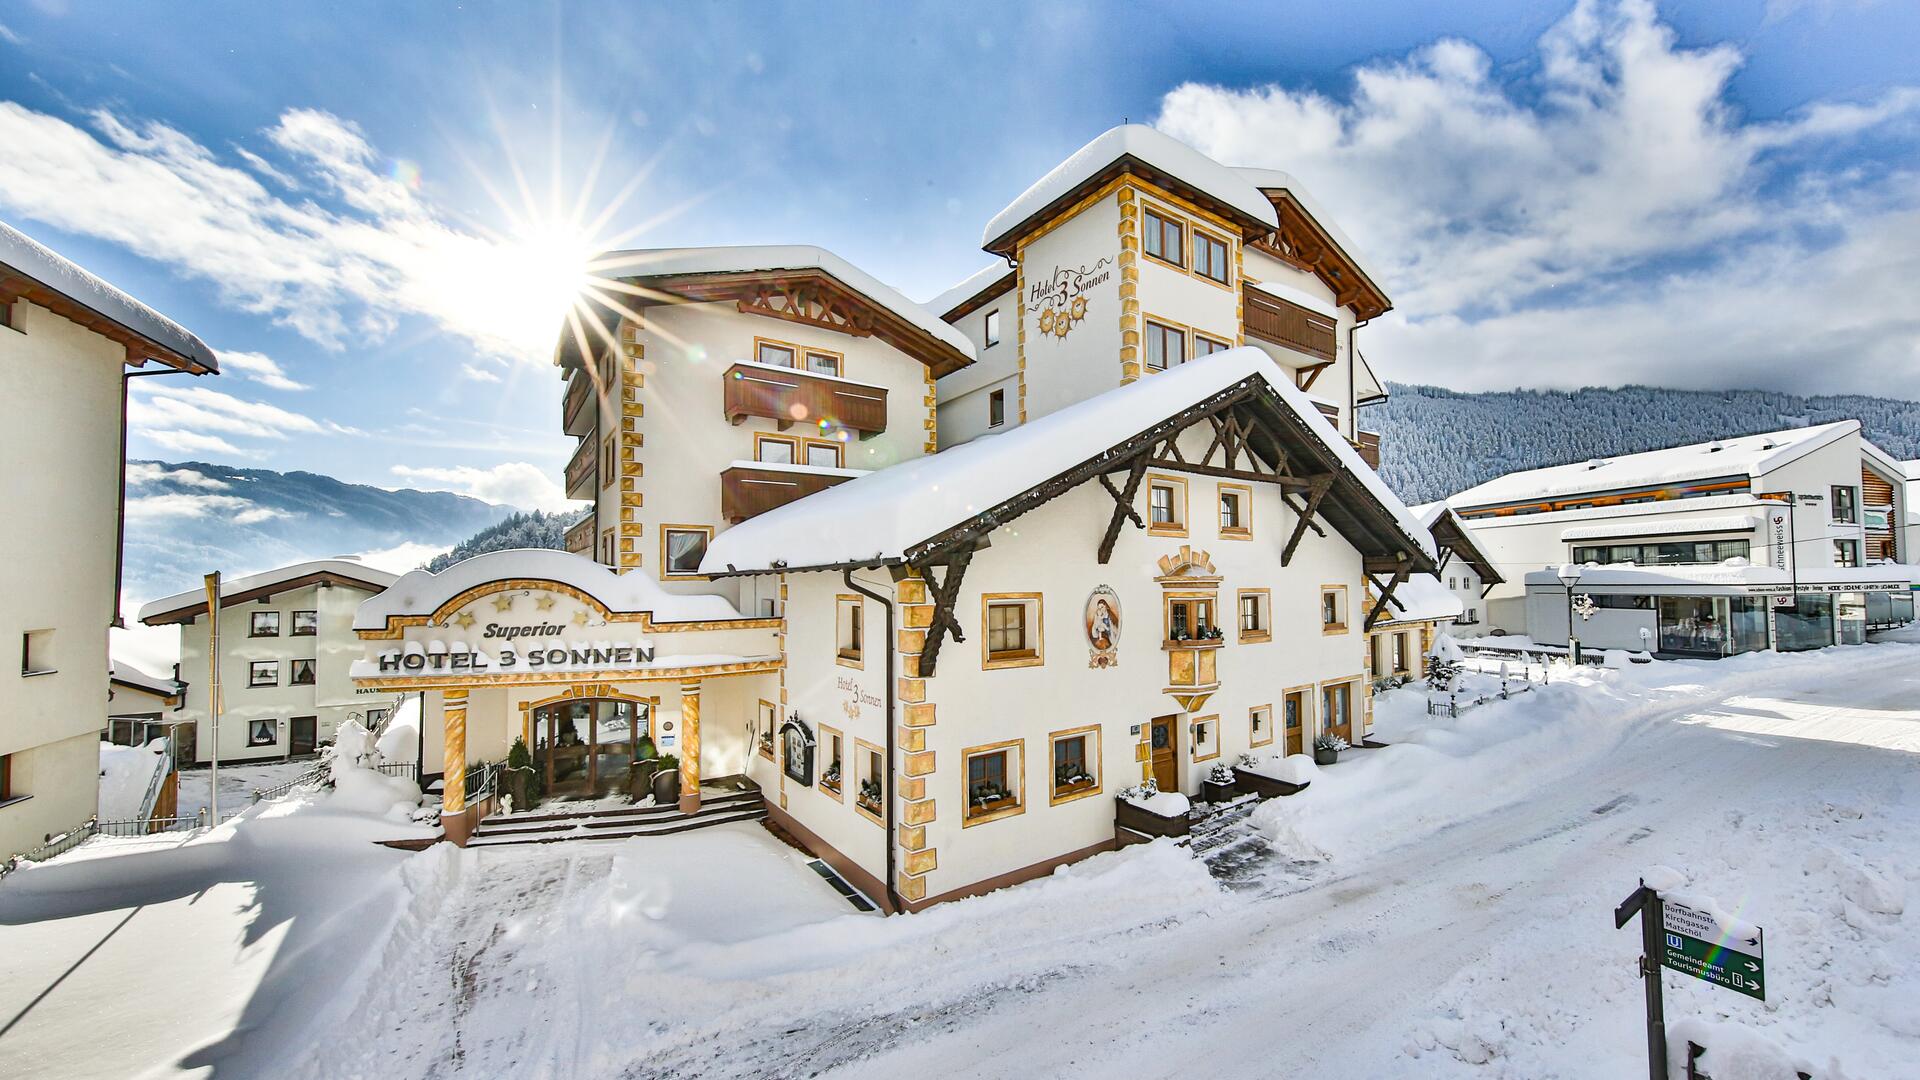 Exterior view hotel in winter